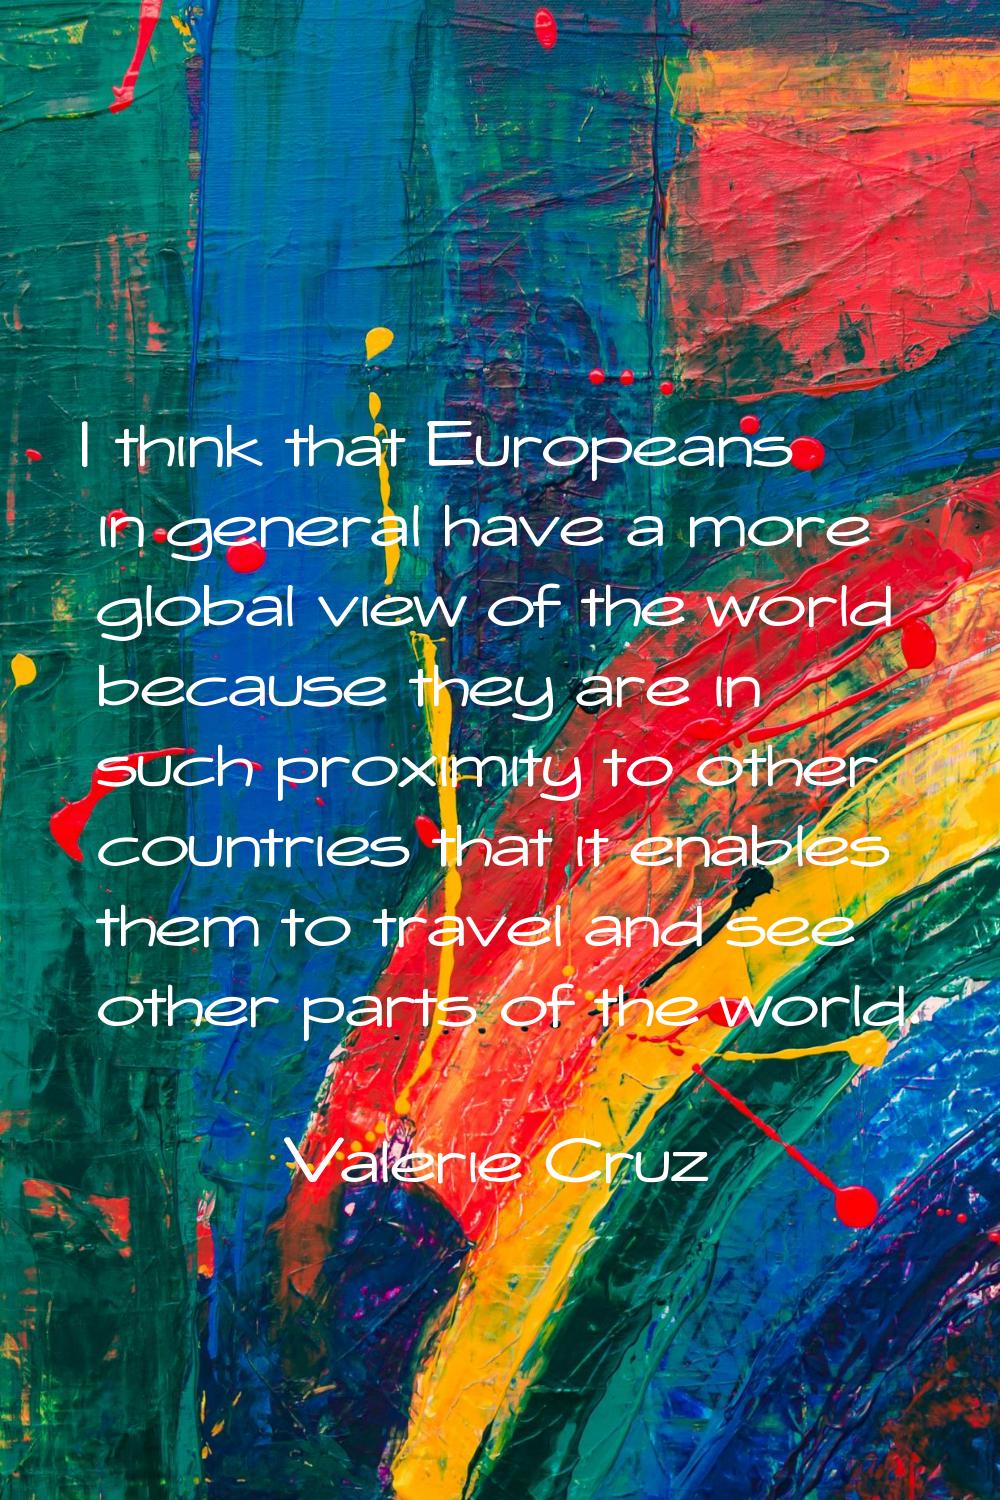 I think that Europeans in general have a more global view of the world because they are in such pro